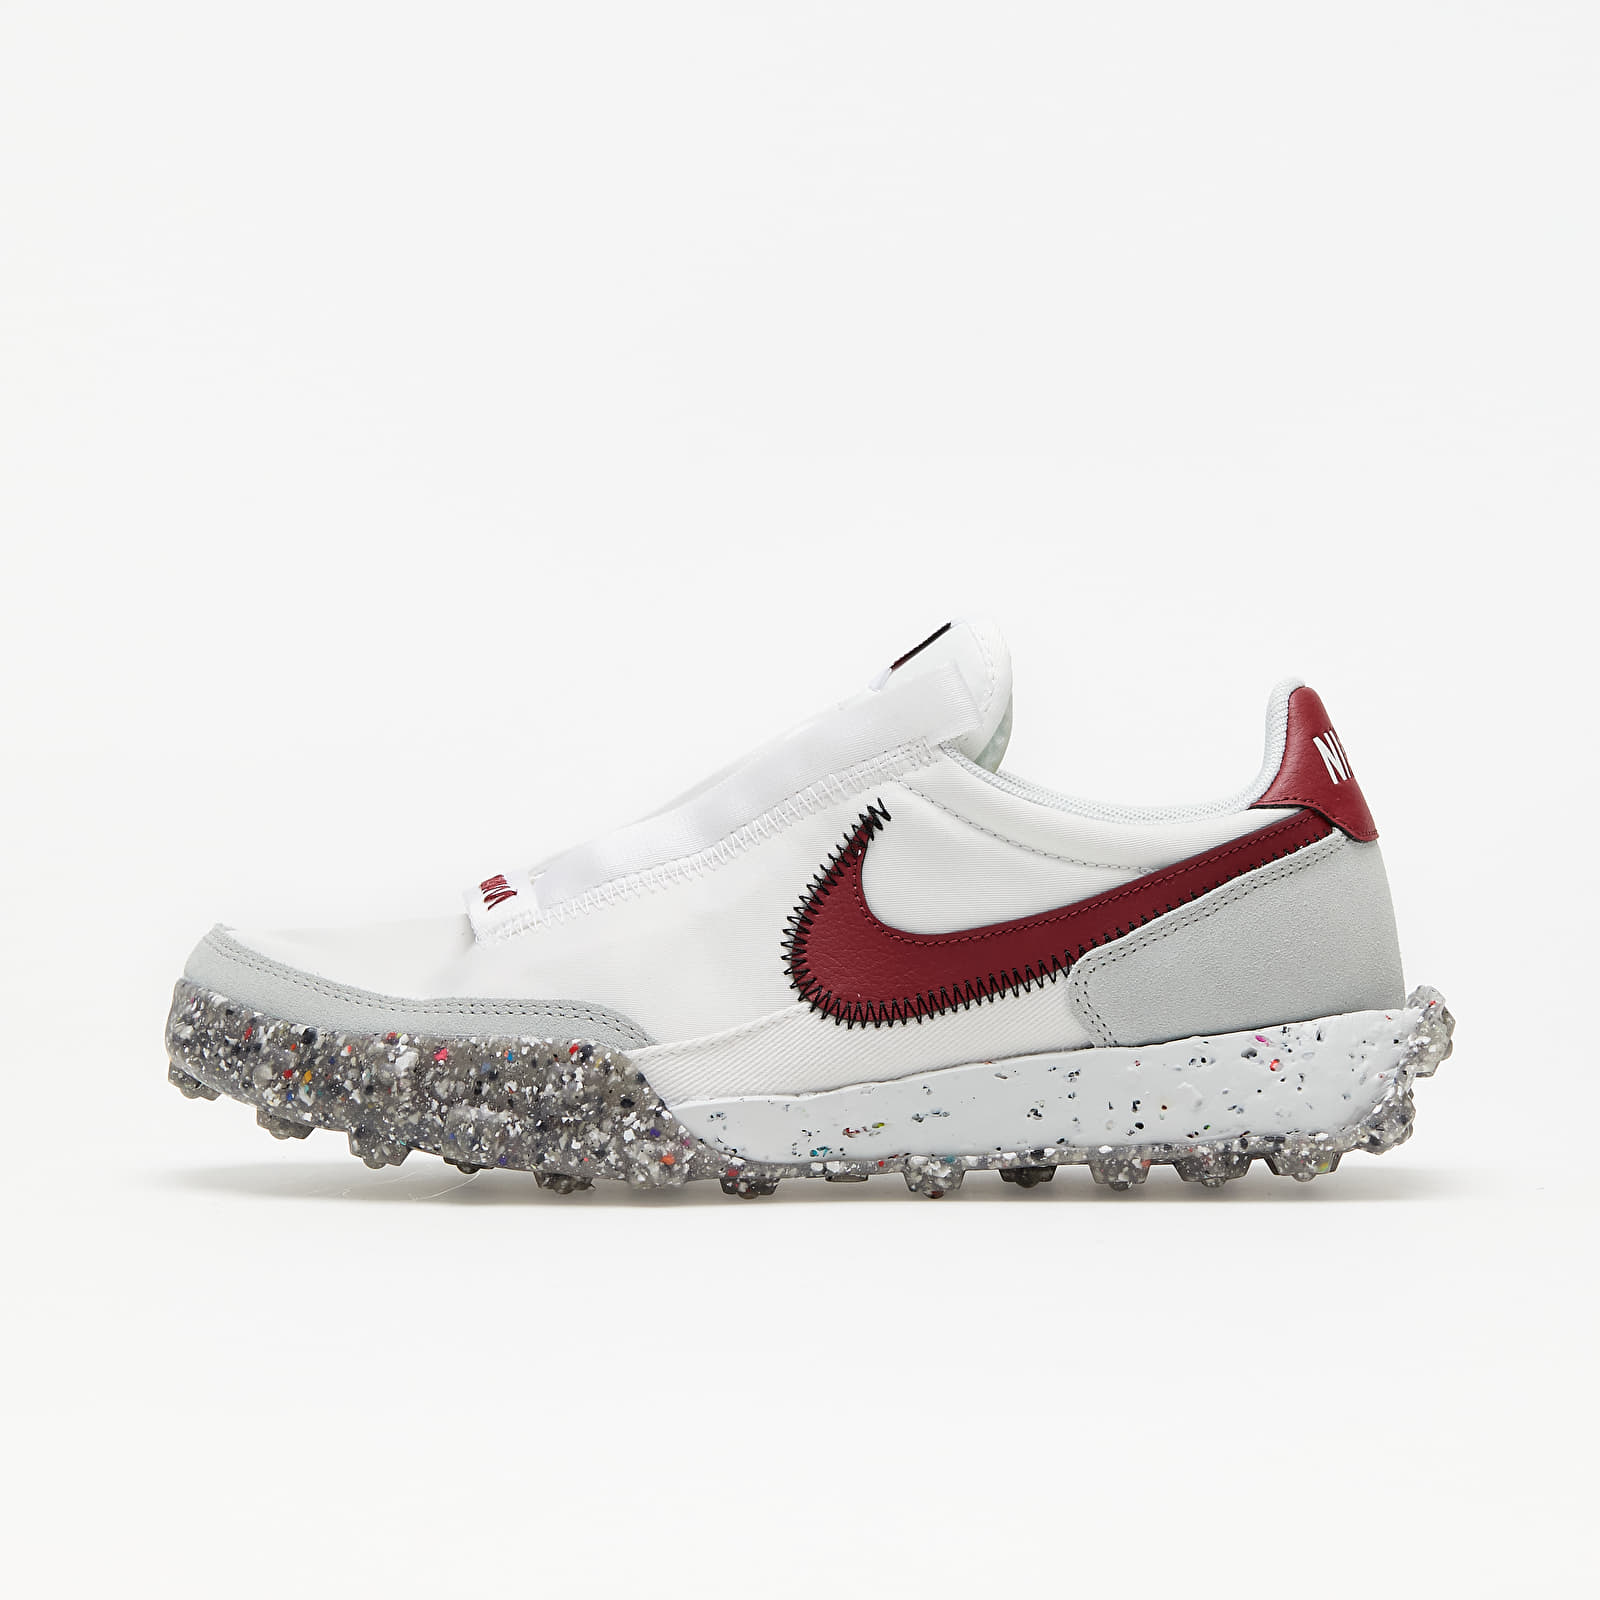 Scarpe donna Nike W Waffle Racer Crater Summit White/ Team Red-Photon Dust-Black